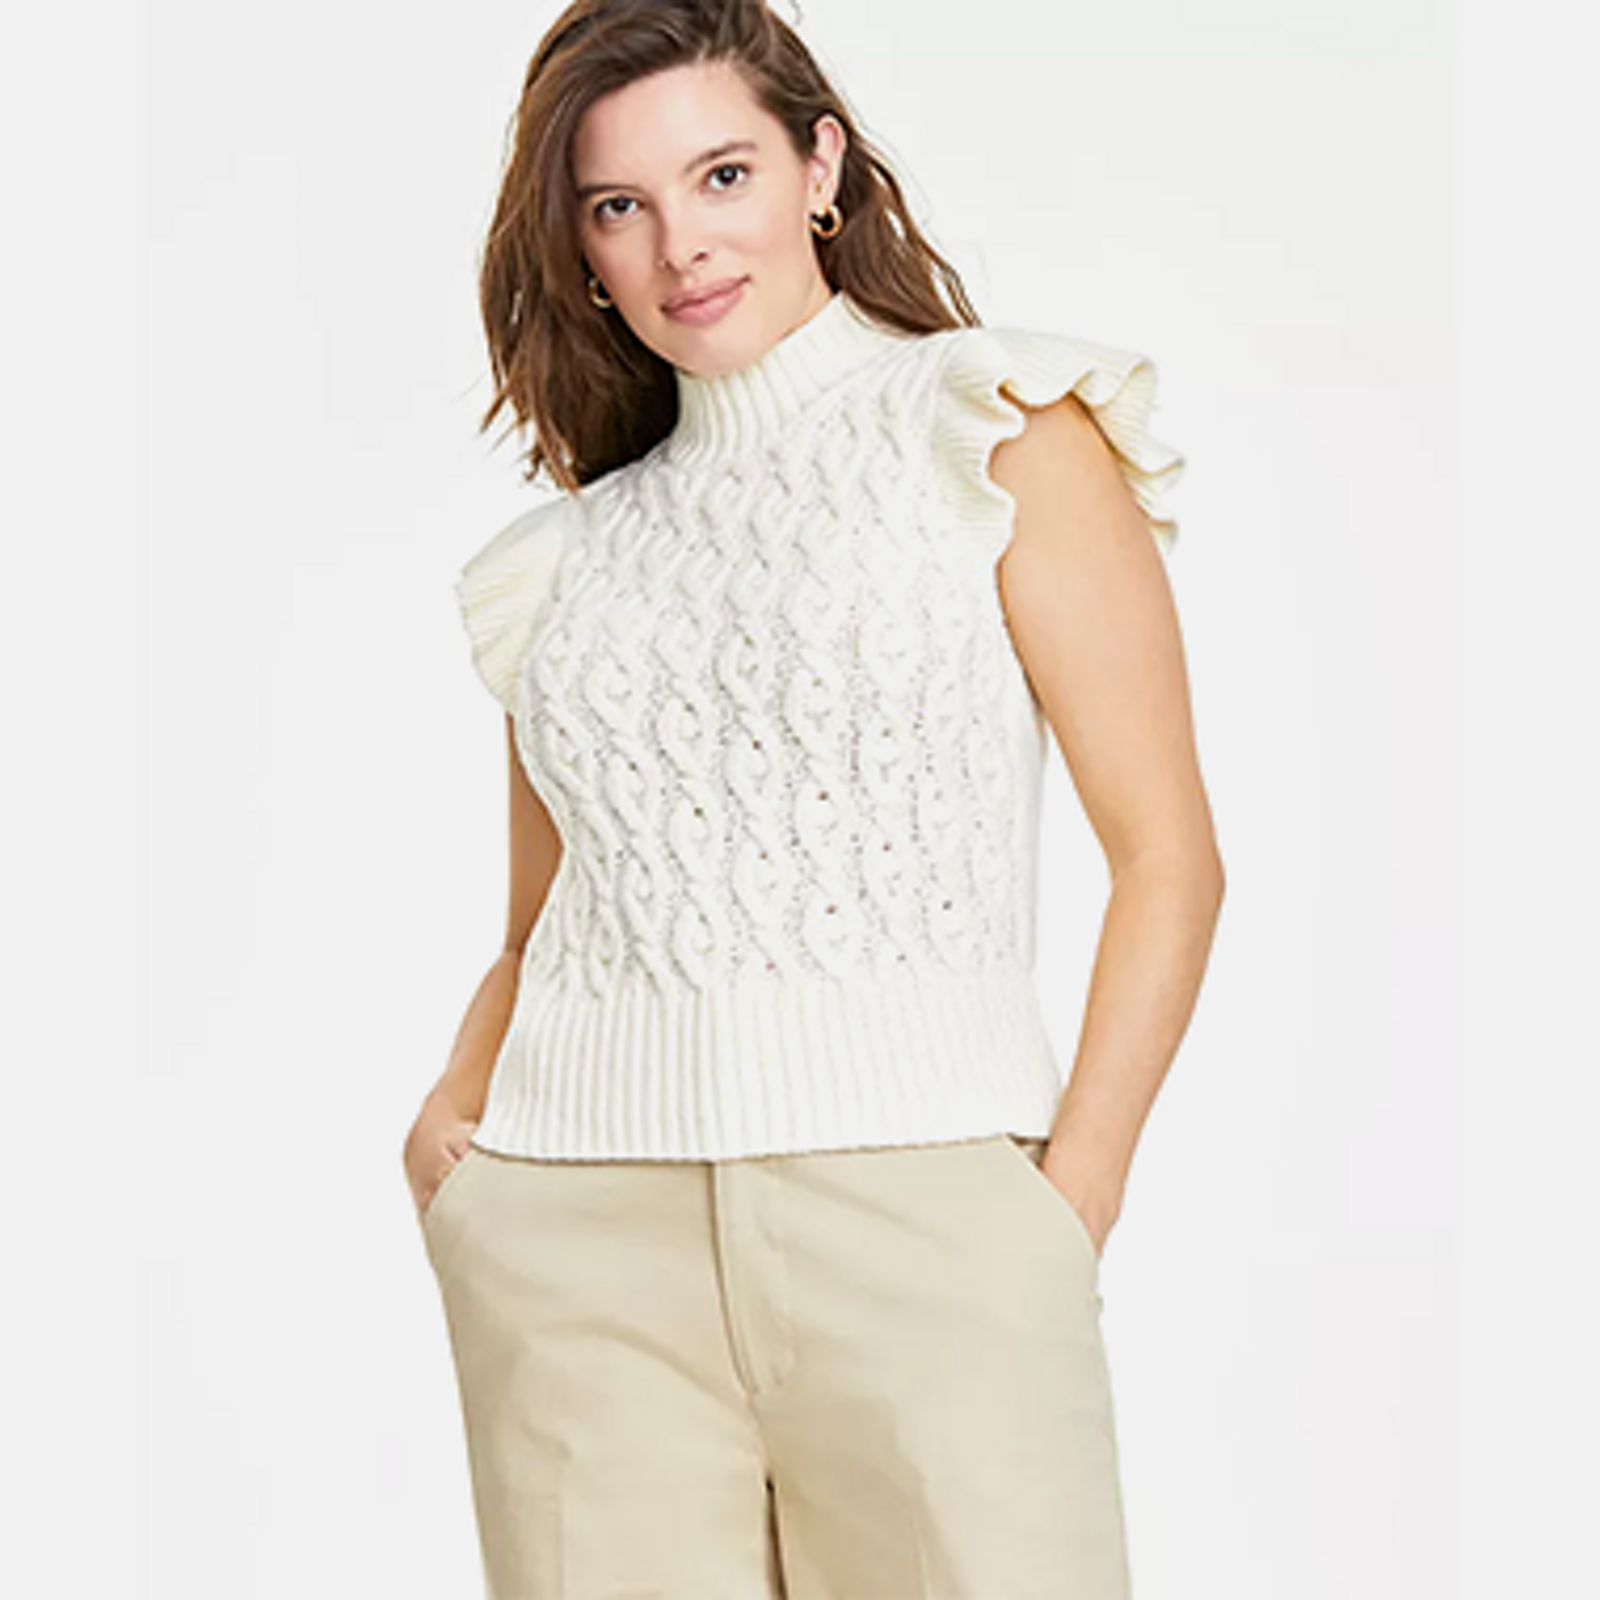 Jm Collection Plus Sea Of Petals Utility Top, Created for Macy's